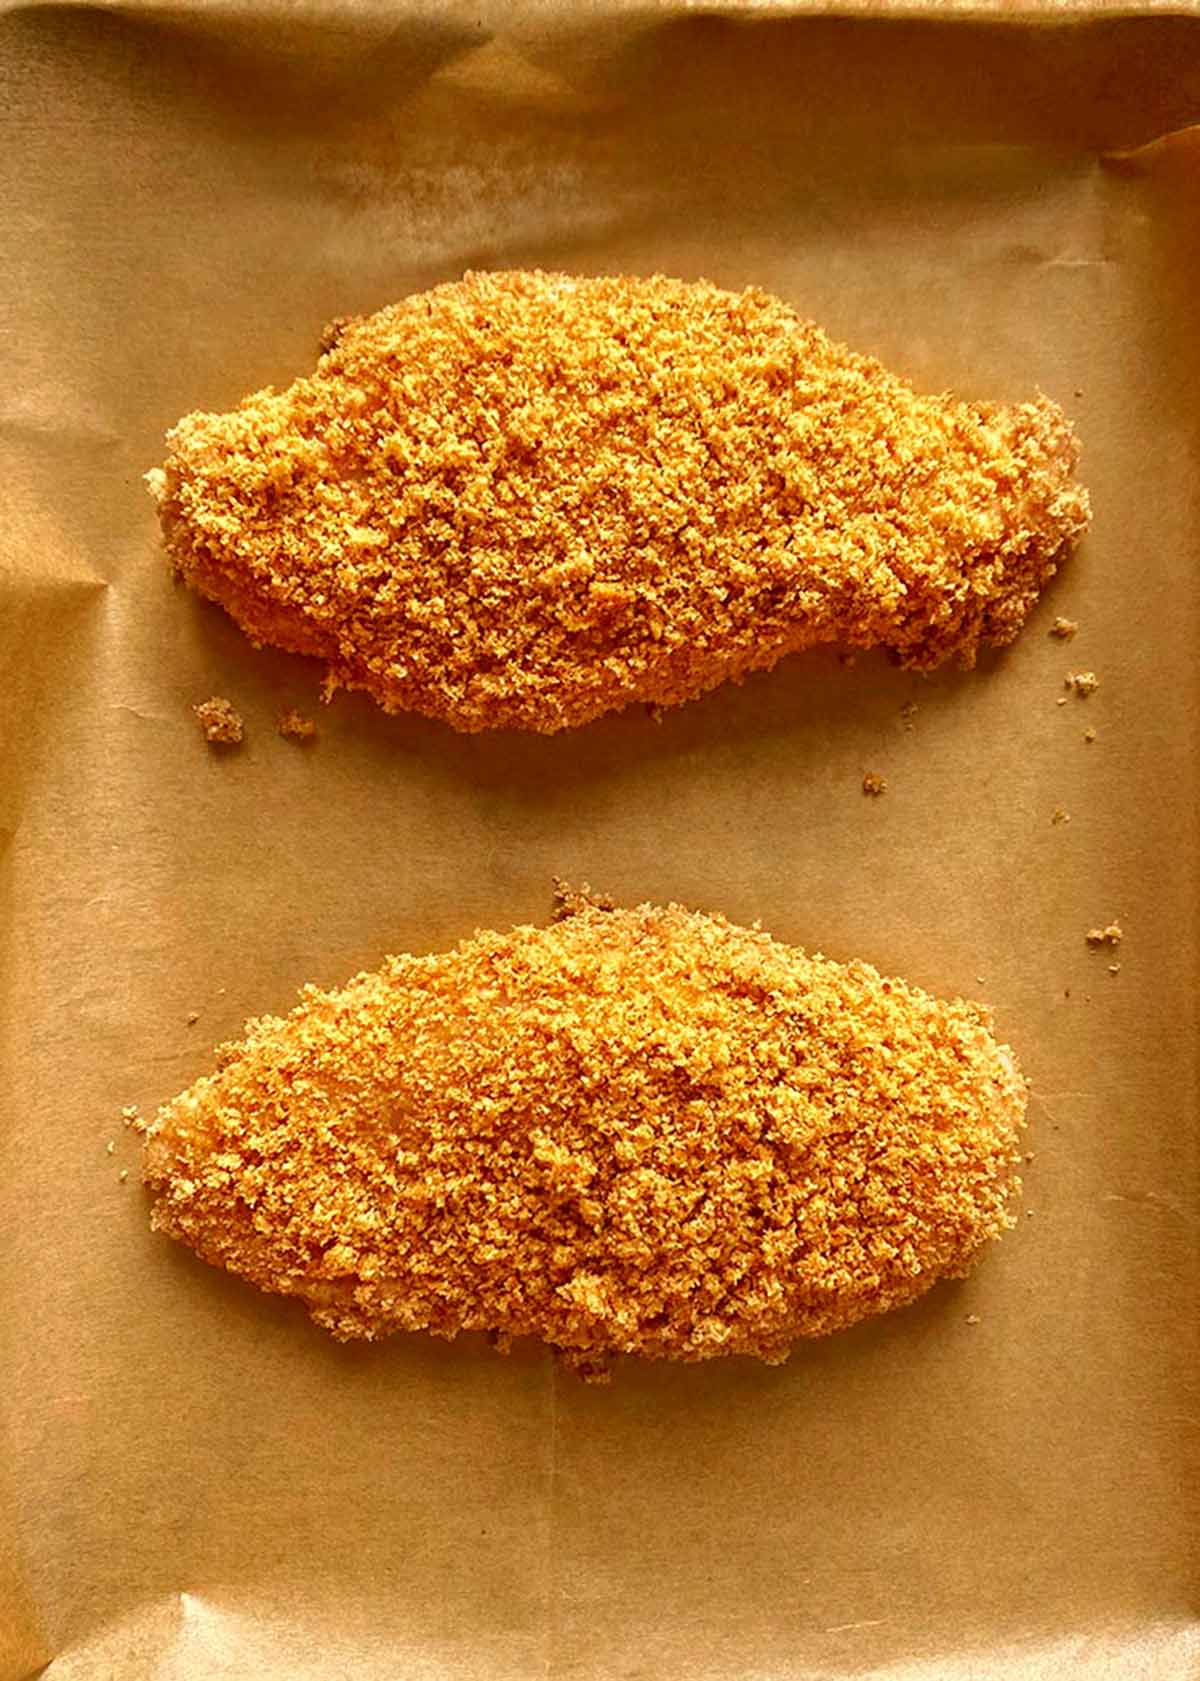 Two breaded chicken breasts on a lined baking tray.